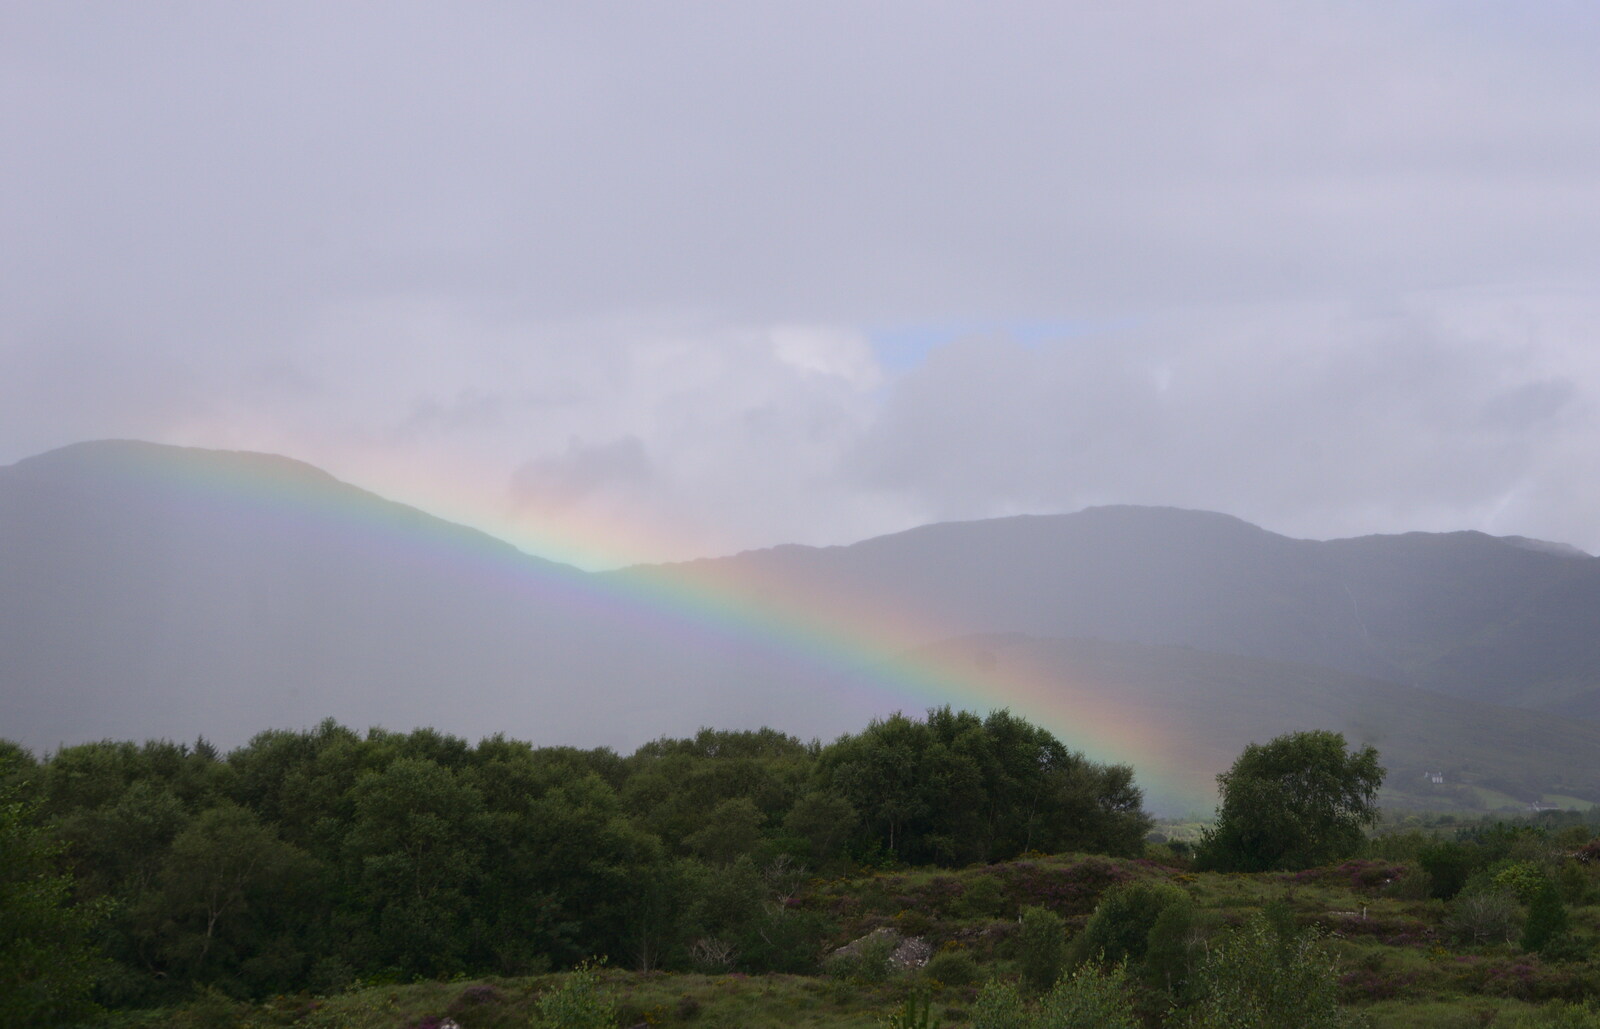 A rainbow over the mountains from In The Sneem, An tSnaidhm, Kerry, Ireland - 1st August 2017